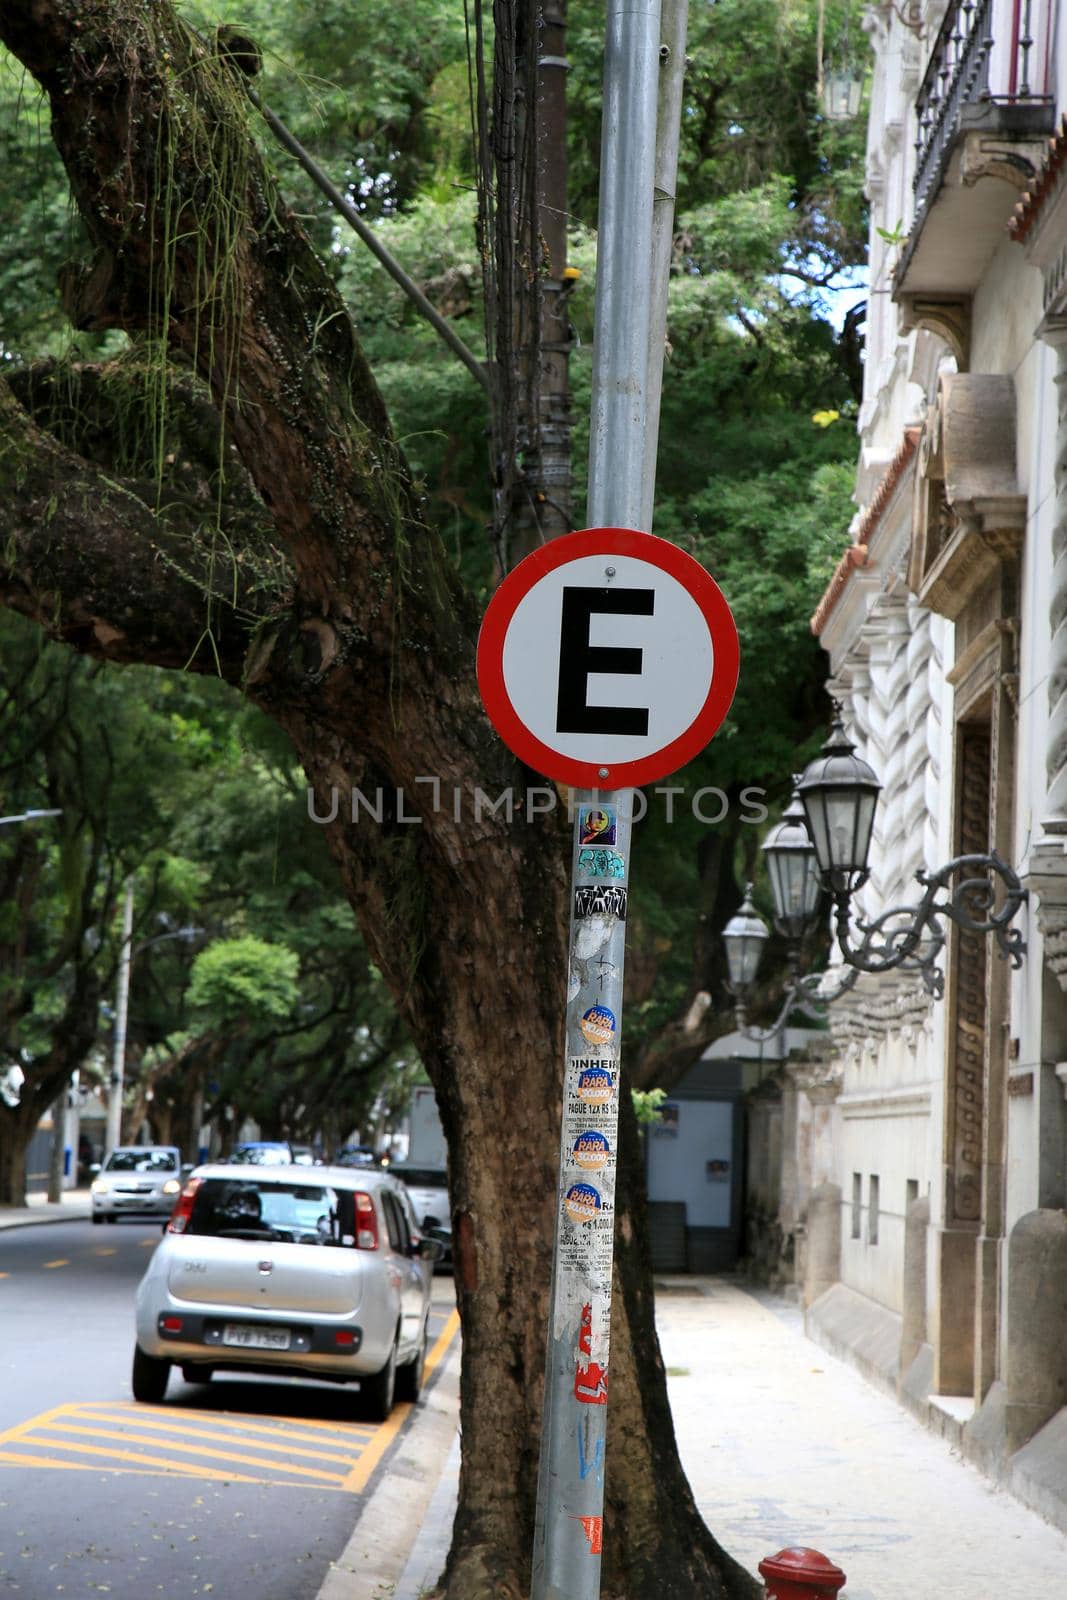 salvador, bahia, brazil - december 14, 2020: idicative traffic sign for regulated parking on public roads in the city of Salvador.